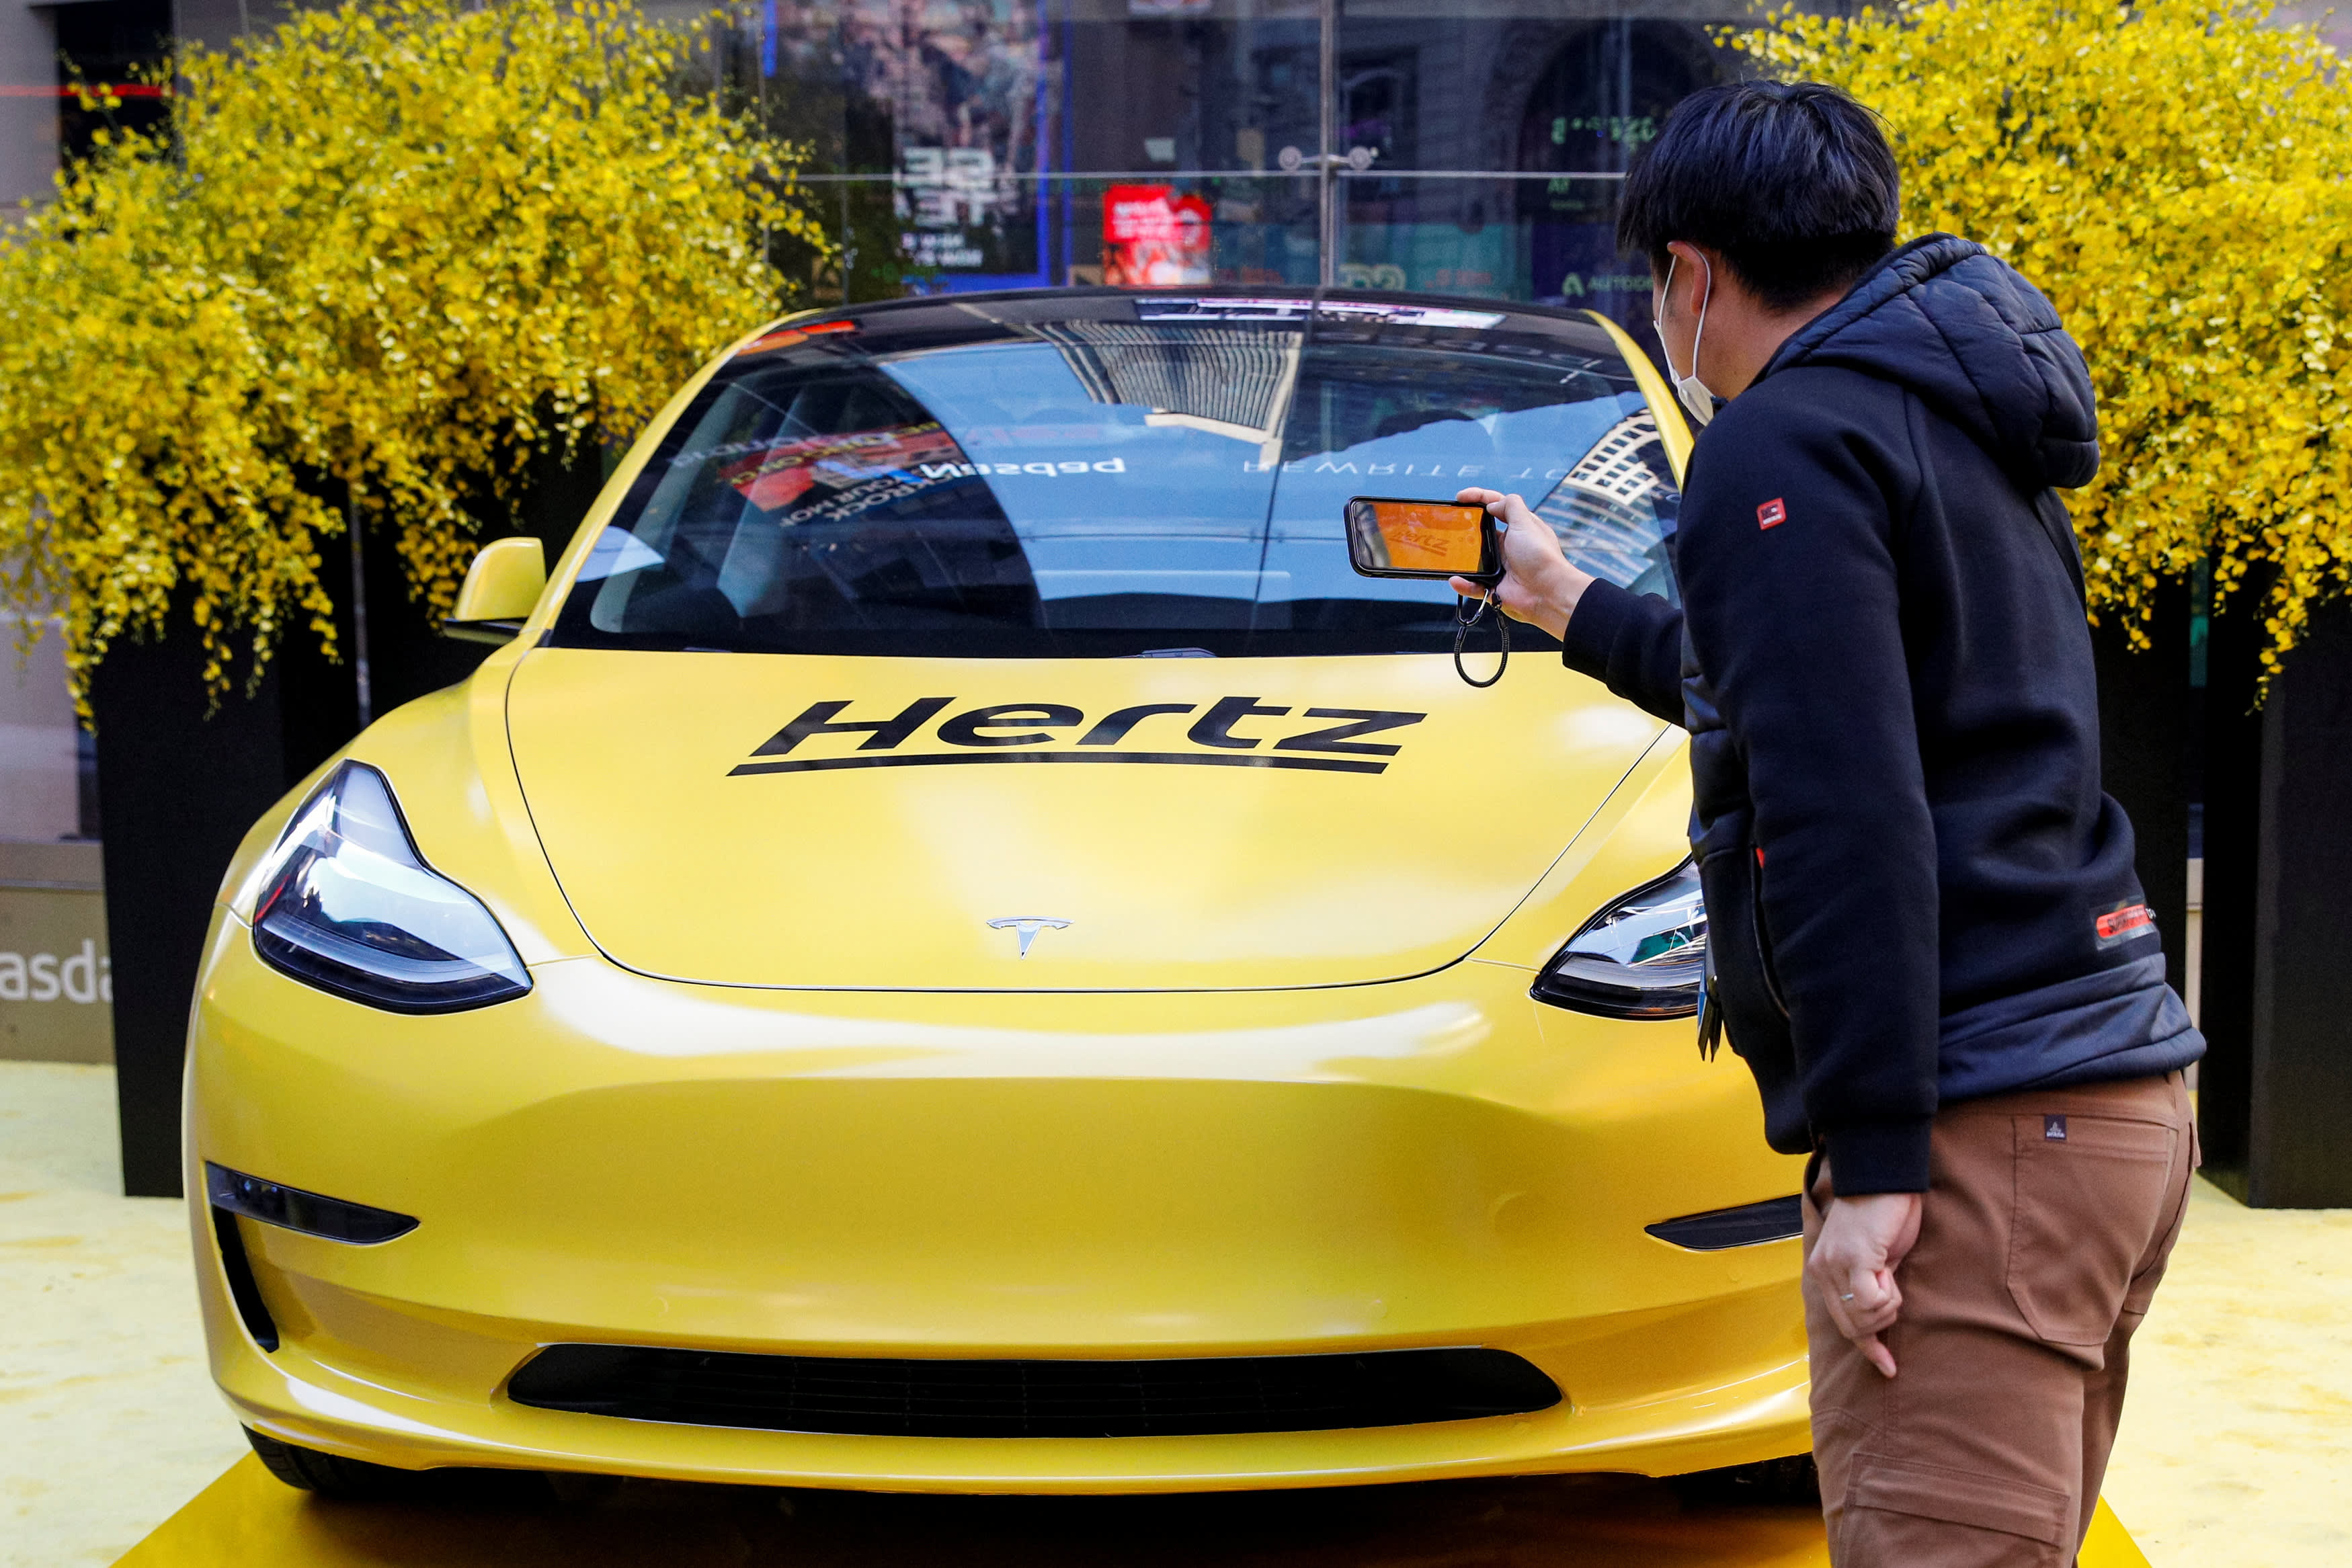 Hertz makes ‘agile’ decision to change strategy and sell electric and Tesla cars